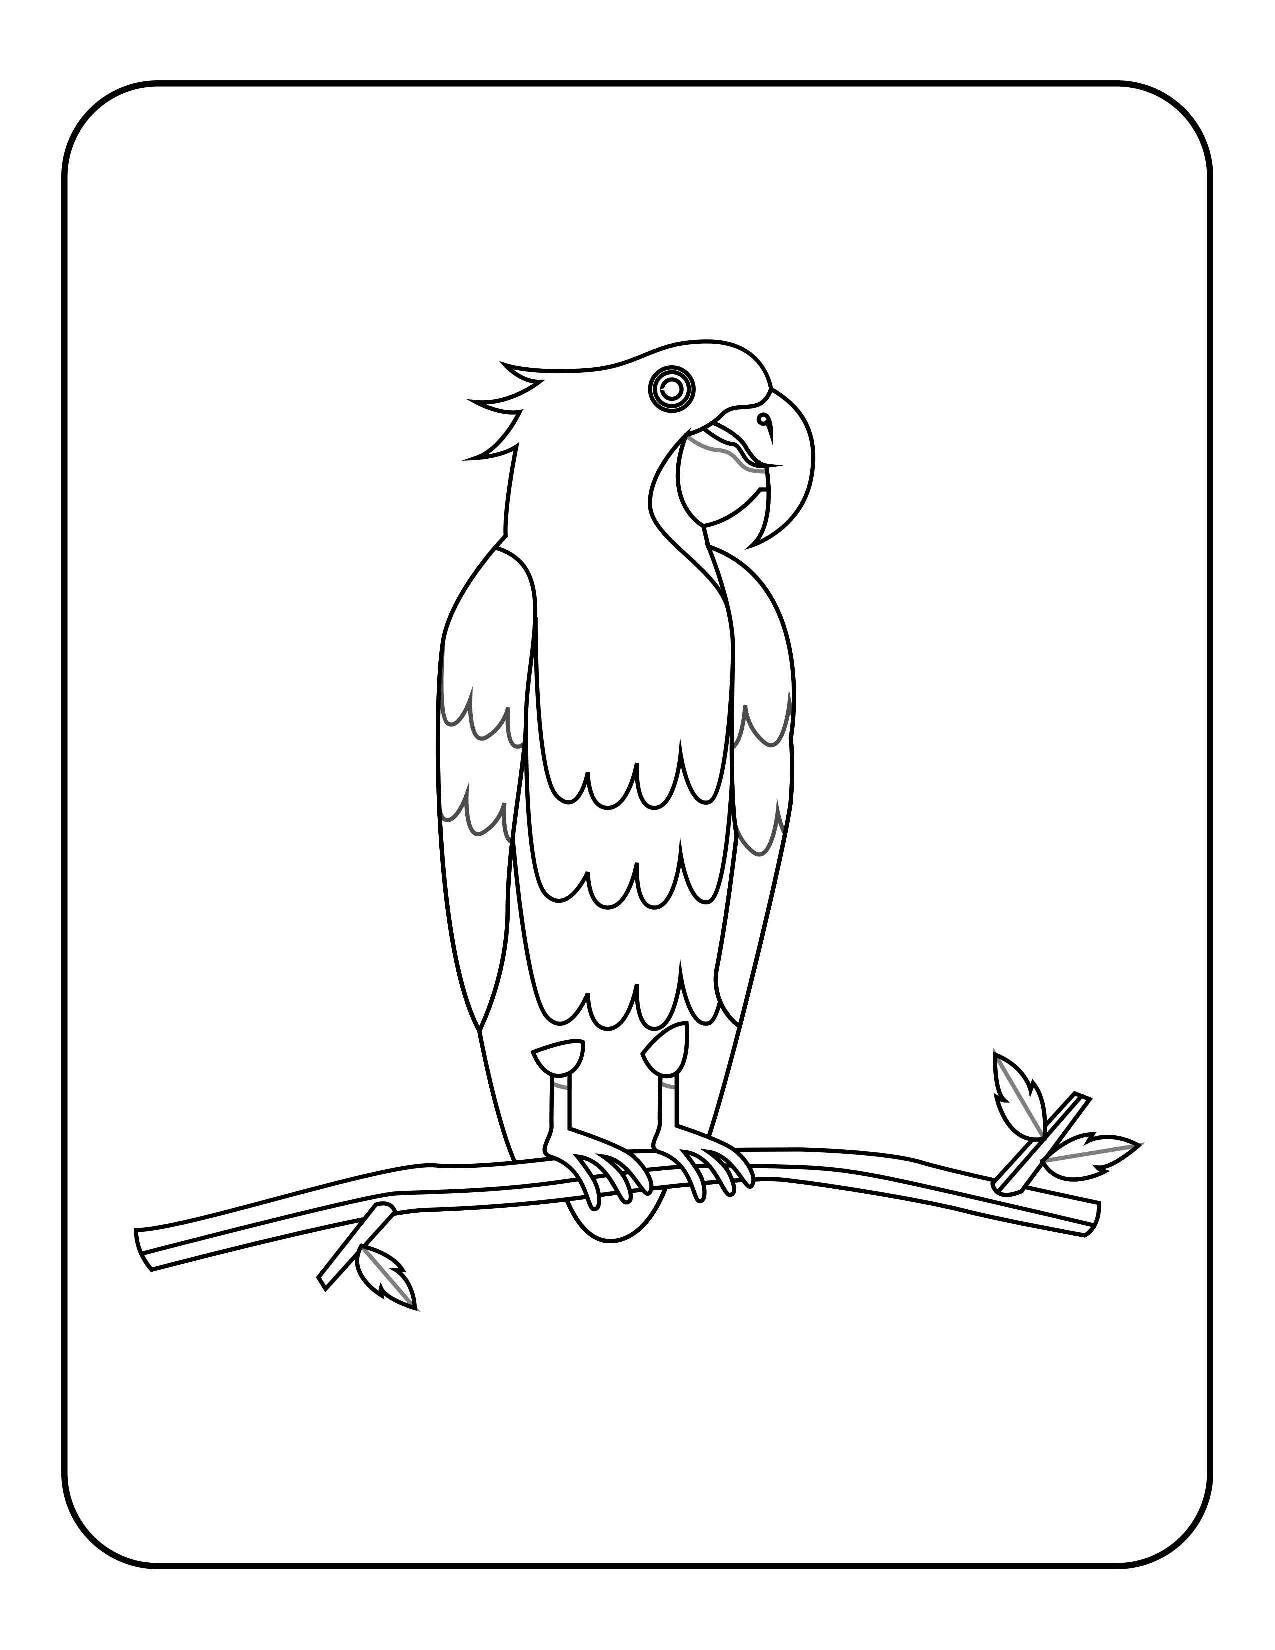 Birds Coloring Pages for Kids | Etsy